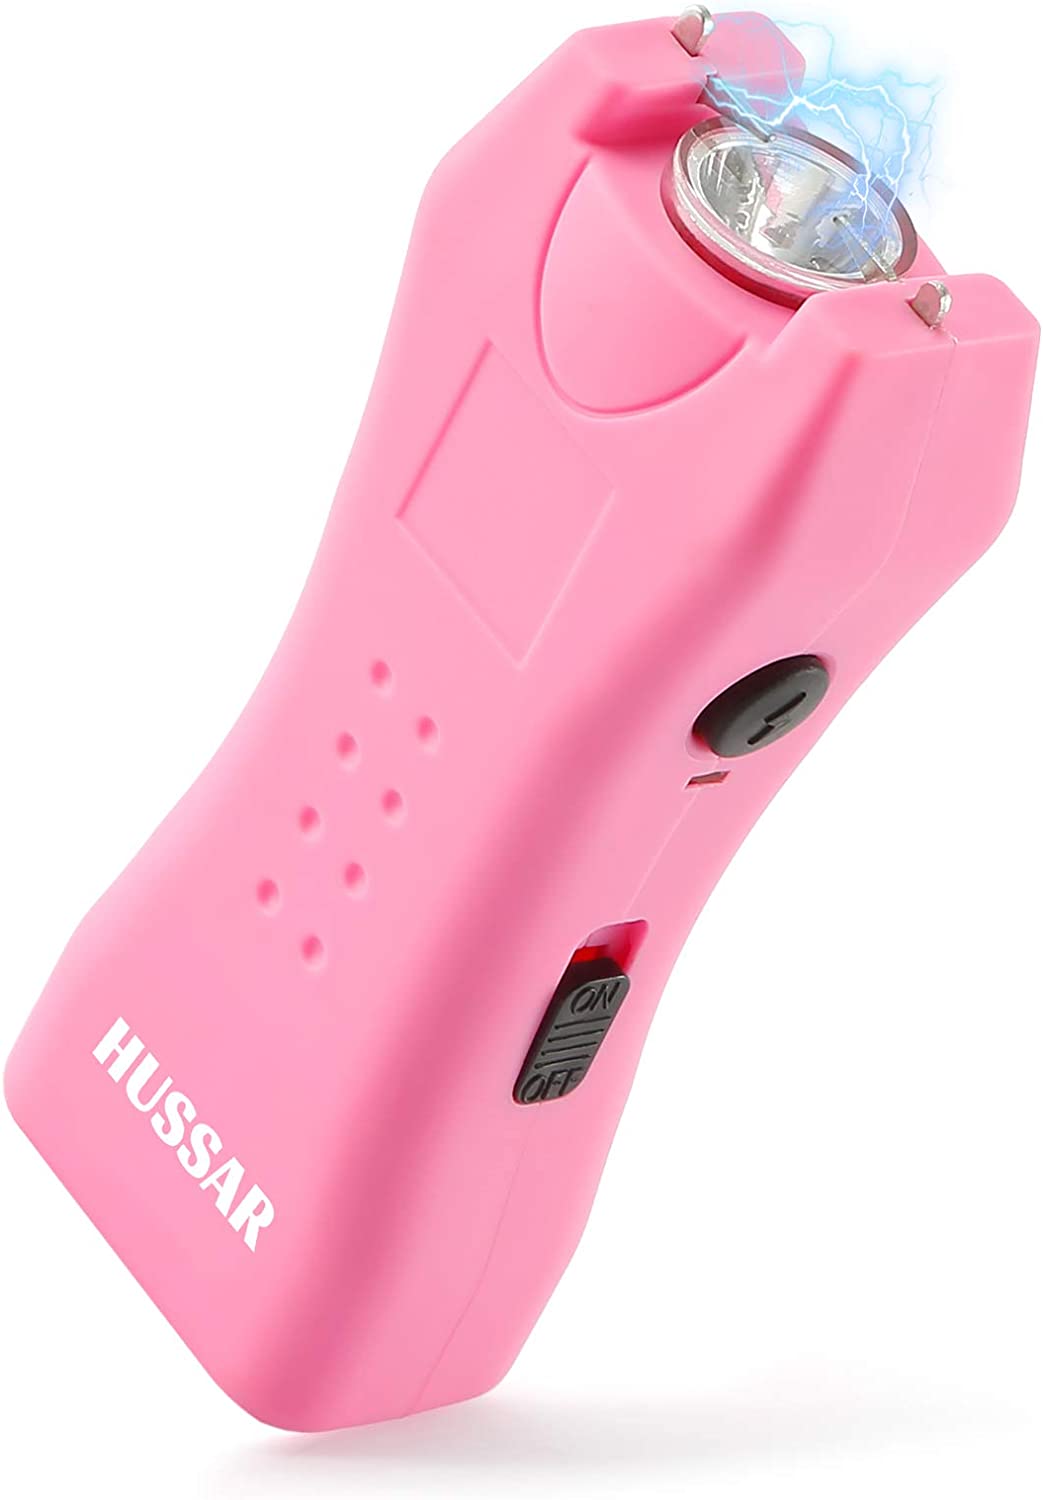 Hussar 618 Stun Gun for Self-Defense, Rechargeable with LED Flashlight, Powerful 1.60 µC Charge with Safety Switch, and Belt Holster